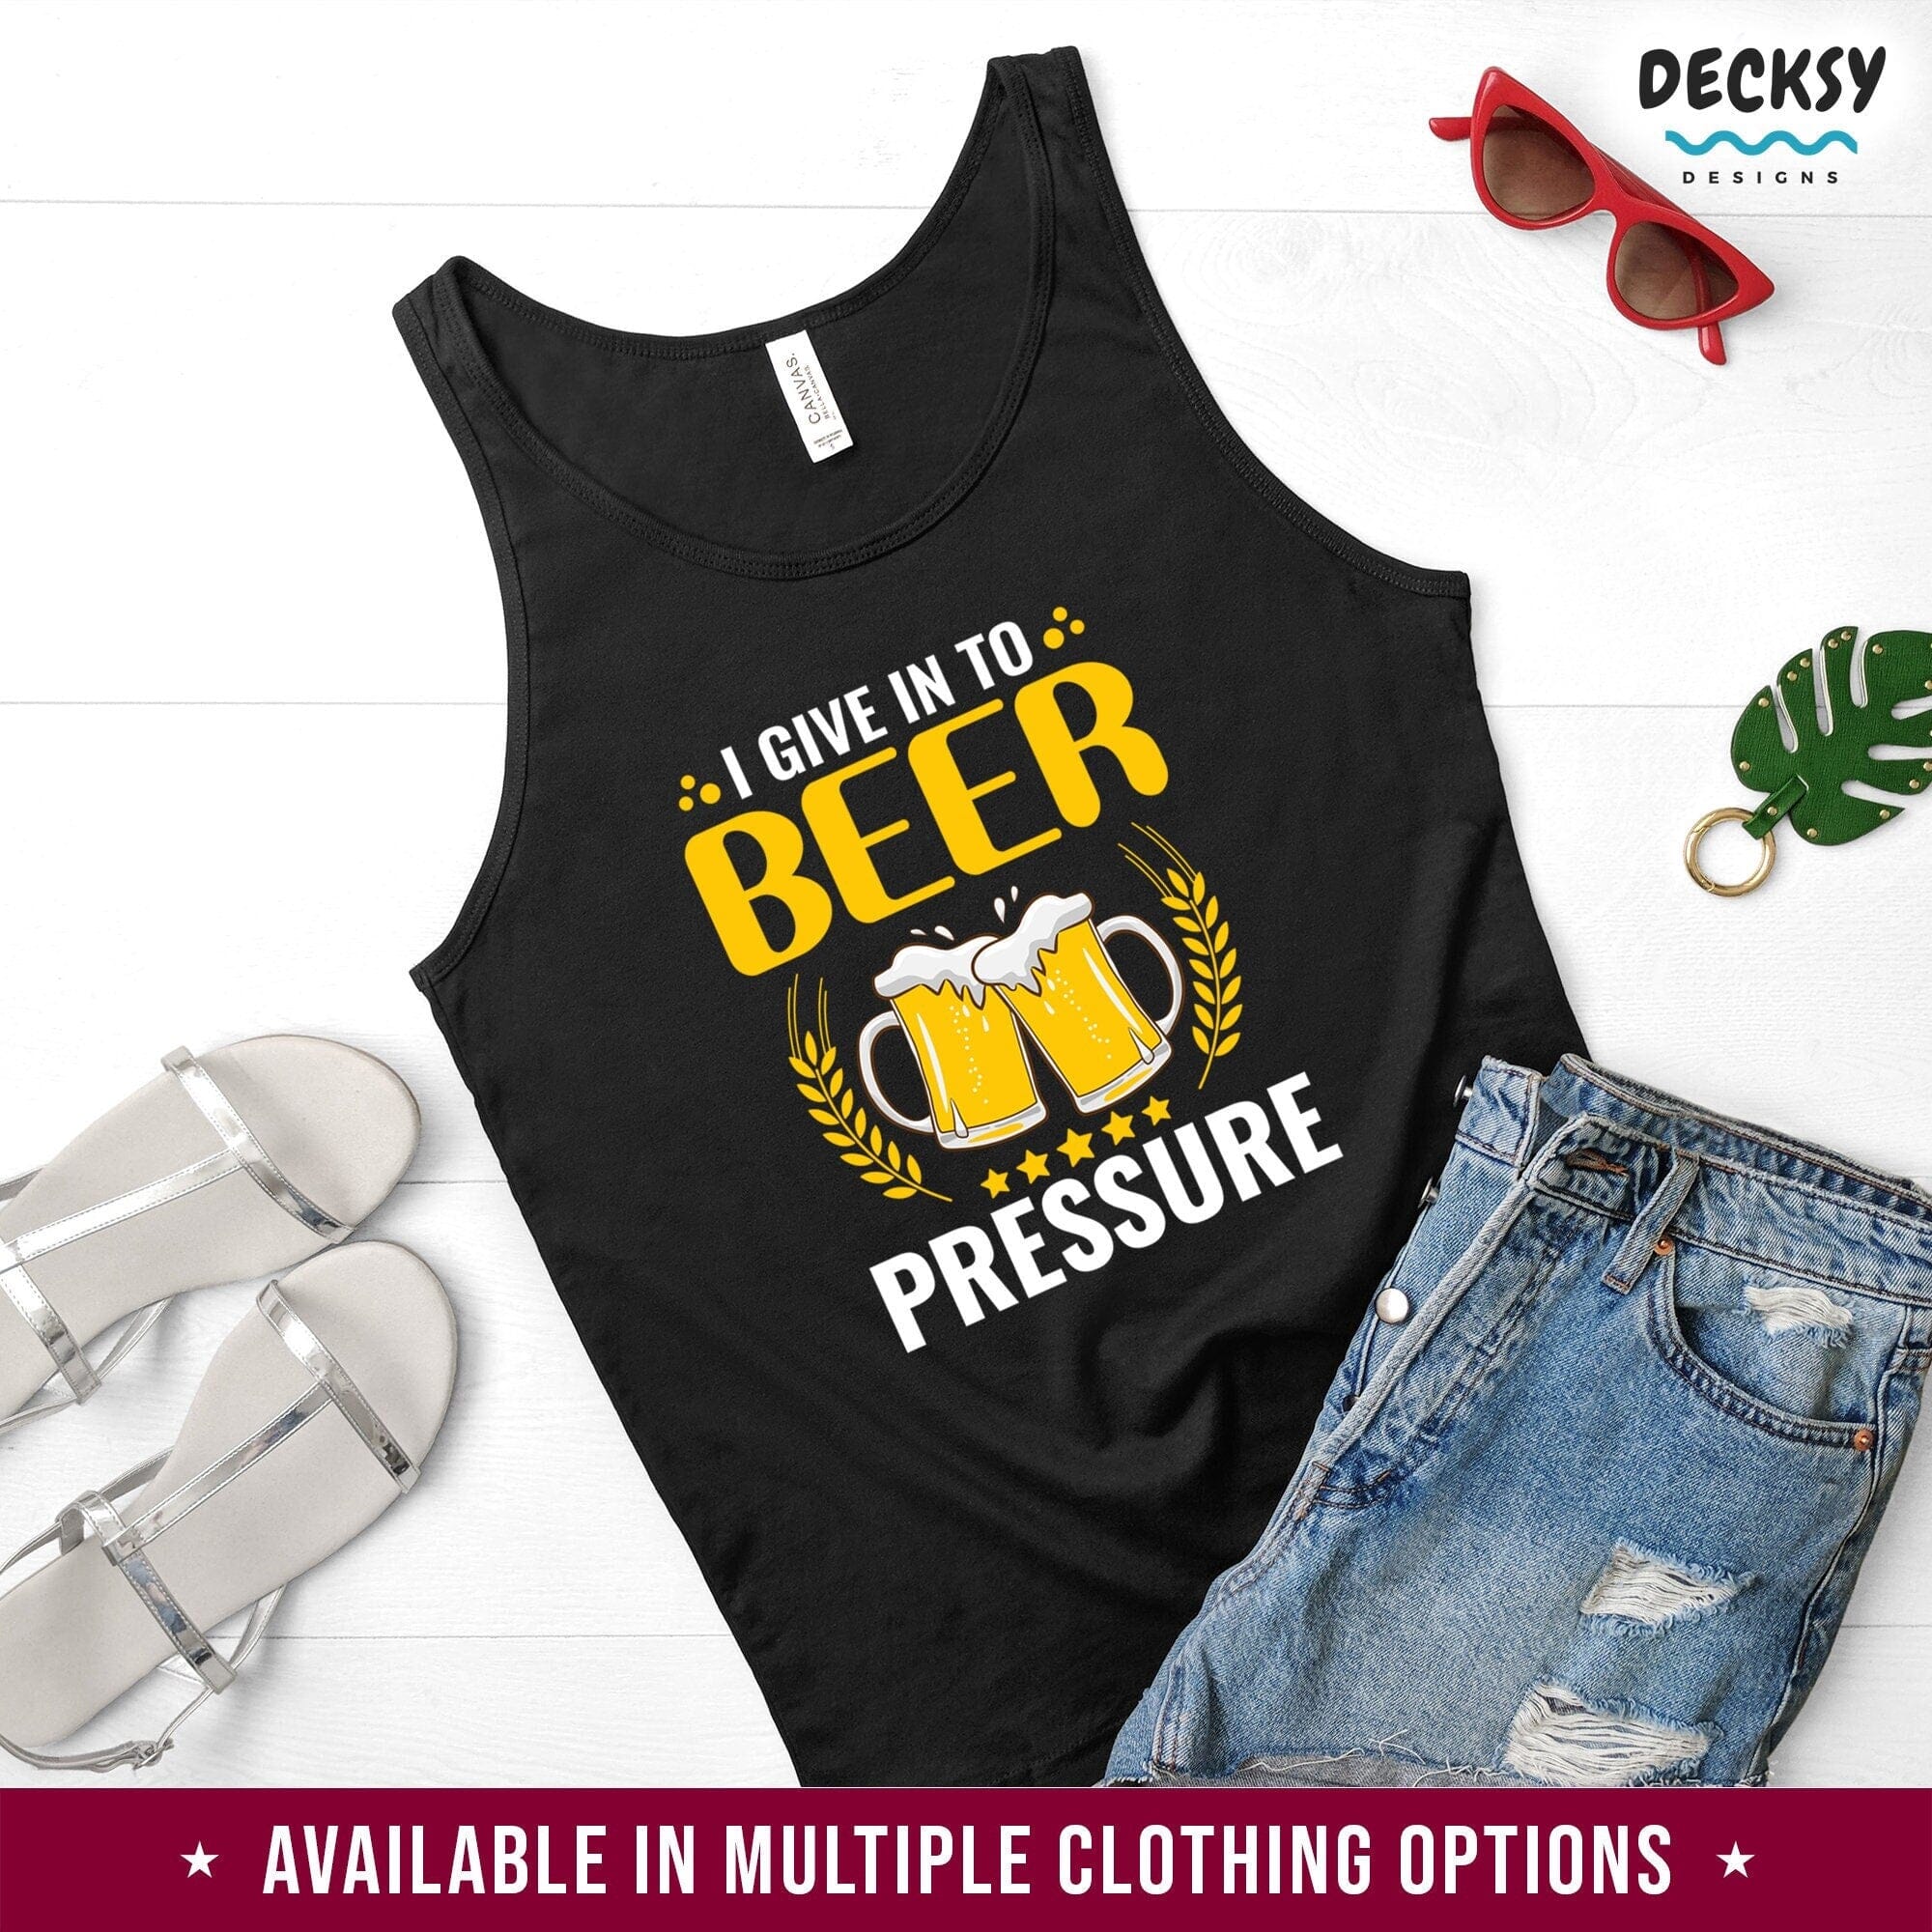 Beer Pressure Shirt, Drinking Buddies Gift-Clothing:Gender-Neutral Adult Clothing:Tops & Tees:T-shirts:Graphic Tees-DecksyDesigns